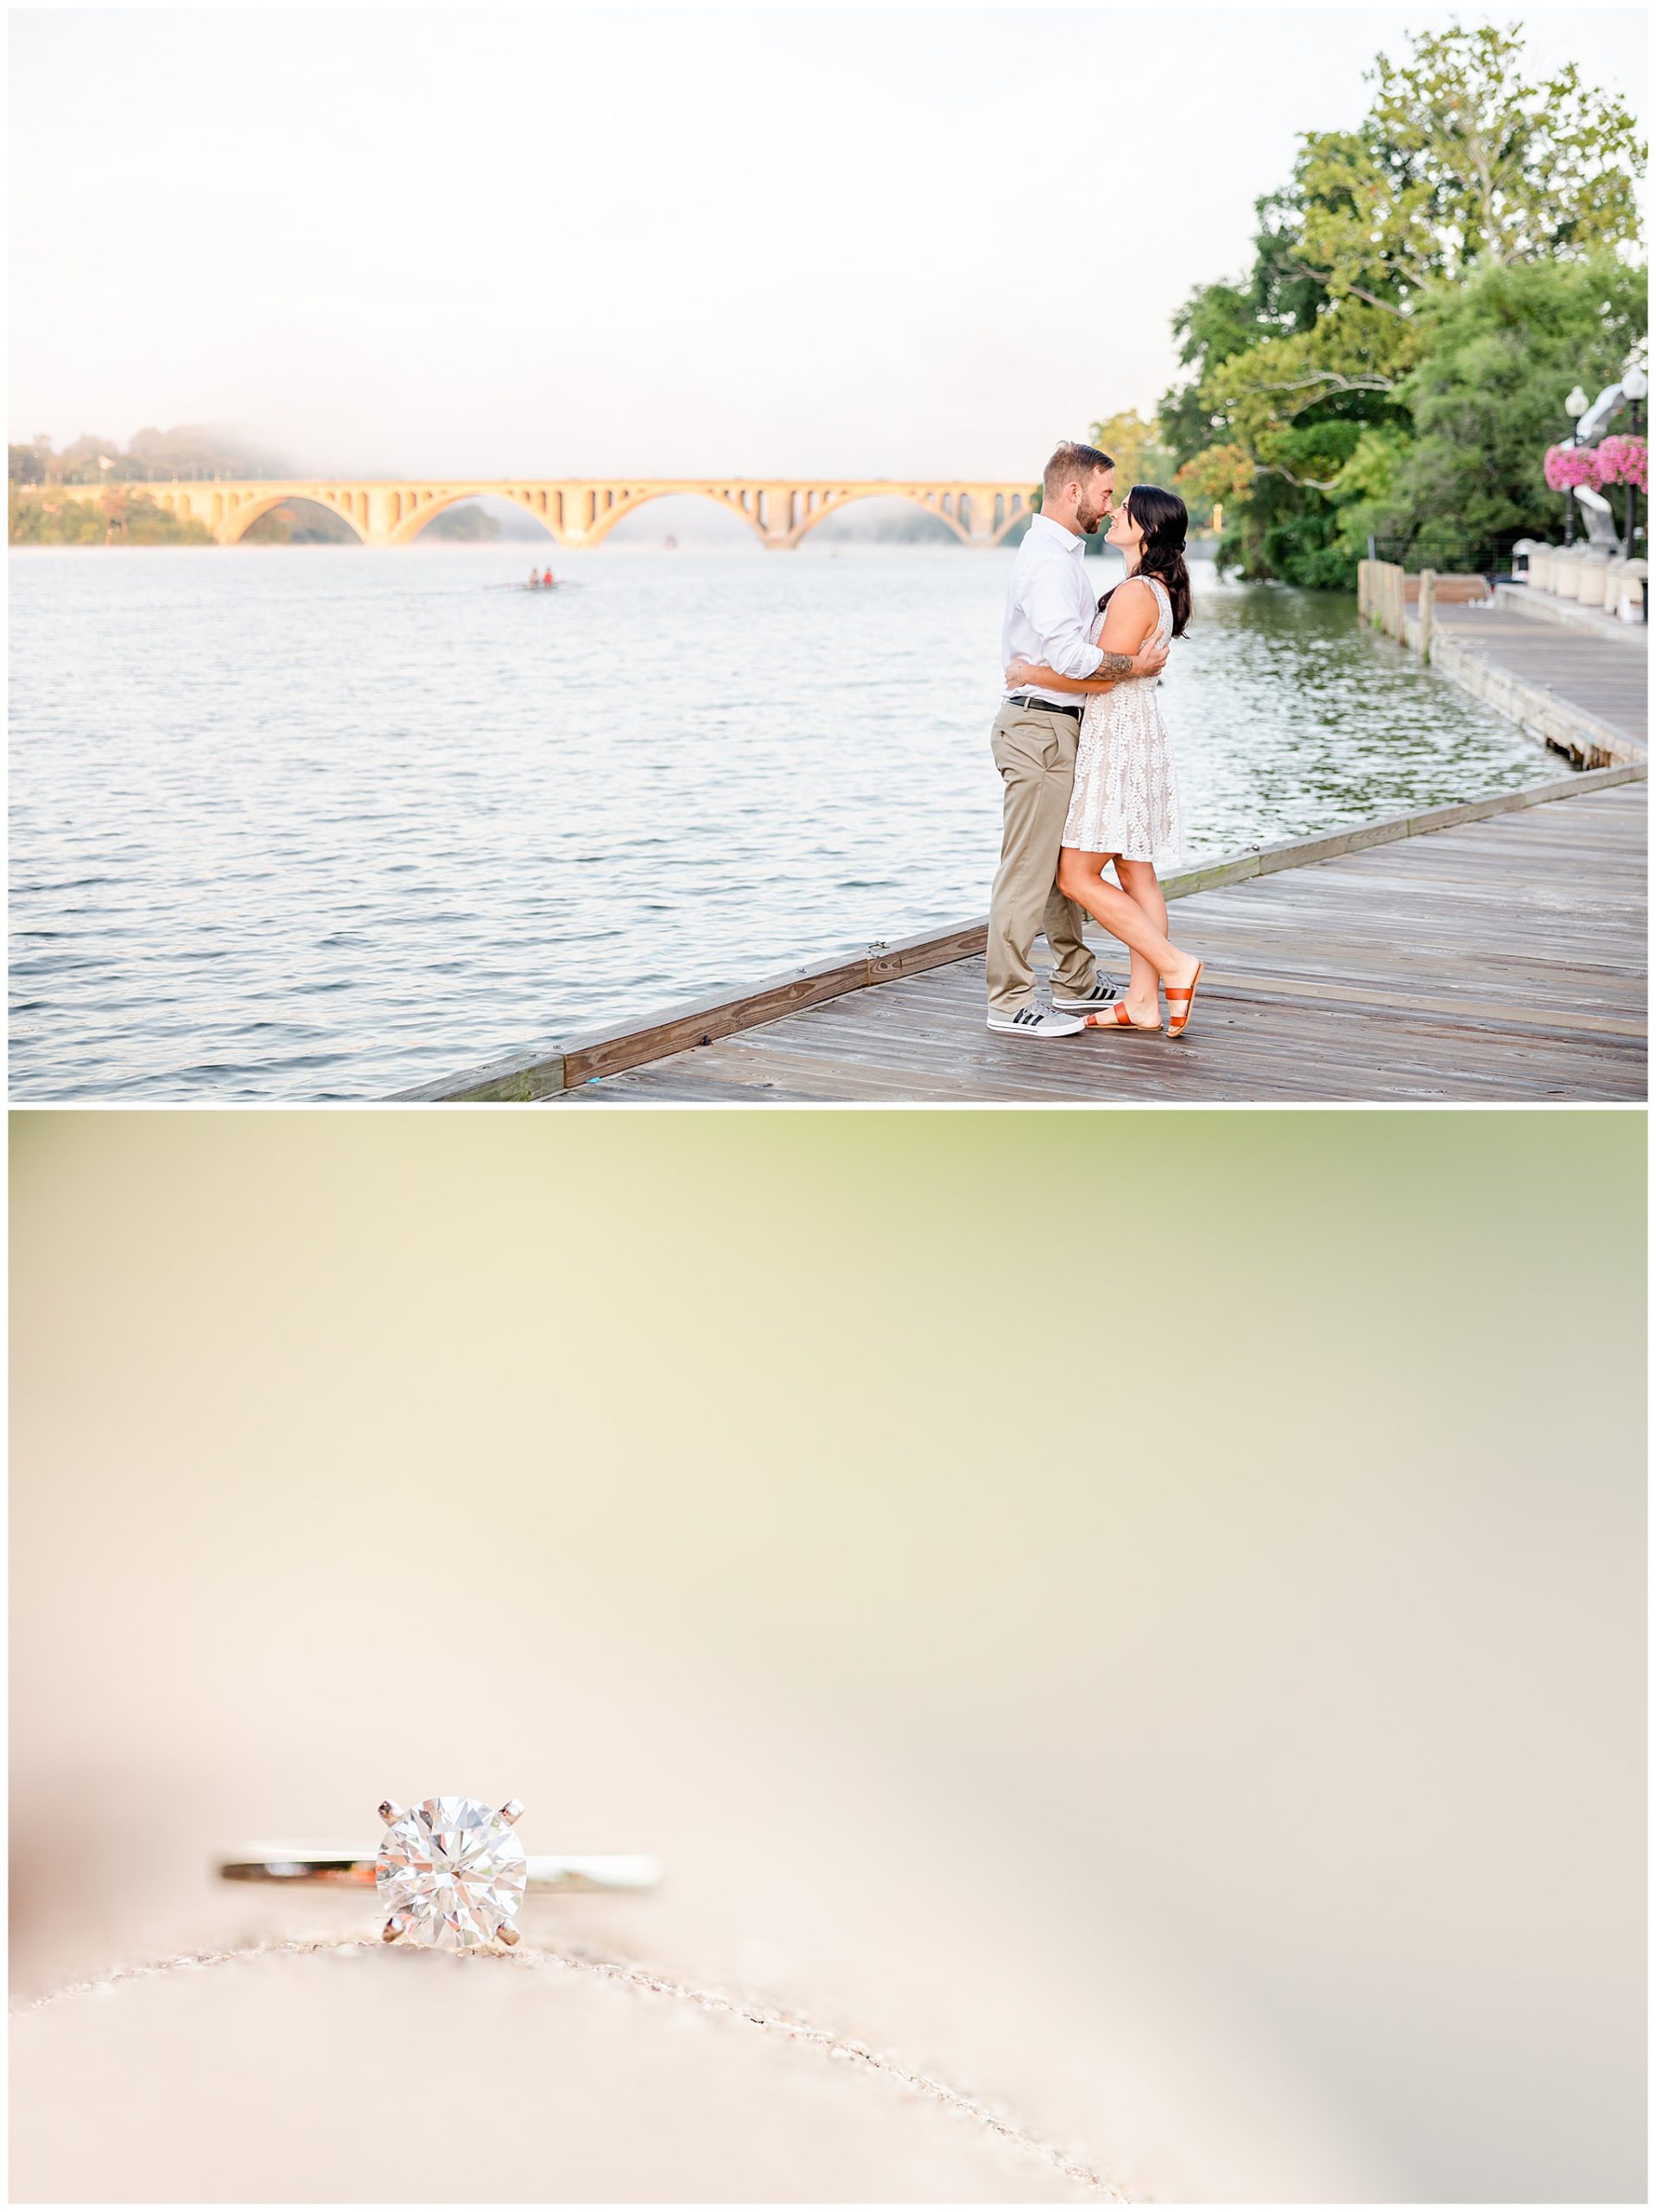 Georgetown waterfront engagement session, Georgetown engagement photos, Georgetown wedding photographer, DC wedding photographer, waterfront engagement photos, Georgetown waterfront engagement photos, DC engagement photos, Rachel E.H. Photography, summer engagement photos, silver engagement ring, couple almost kissing, couple on boardwalk